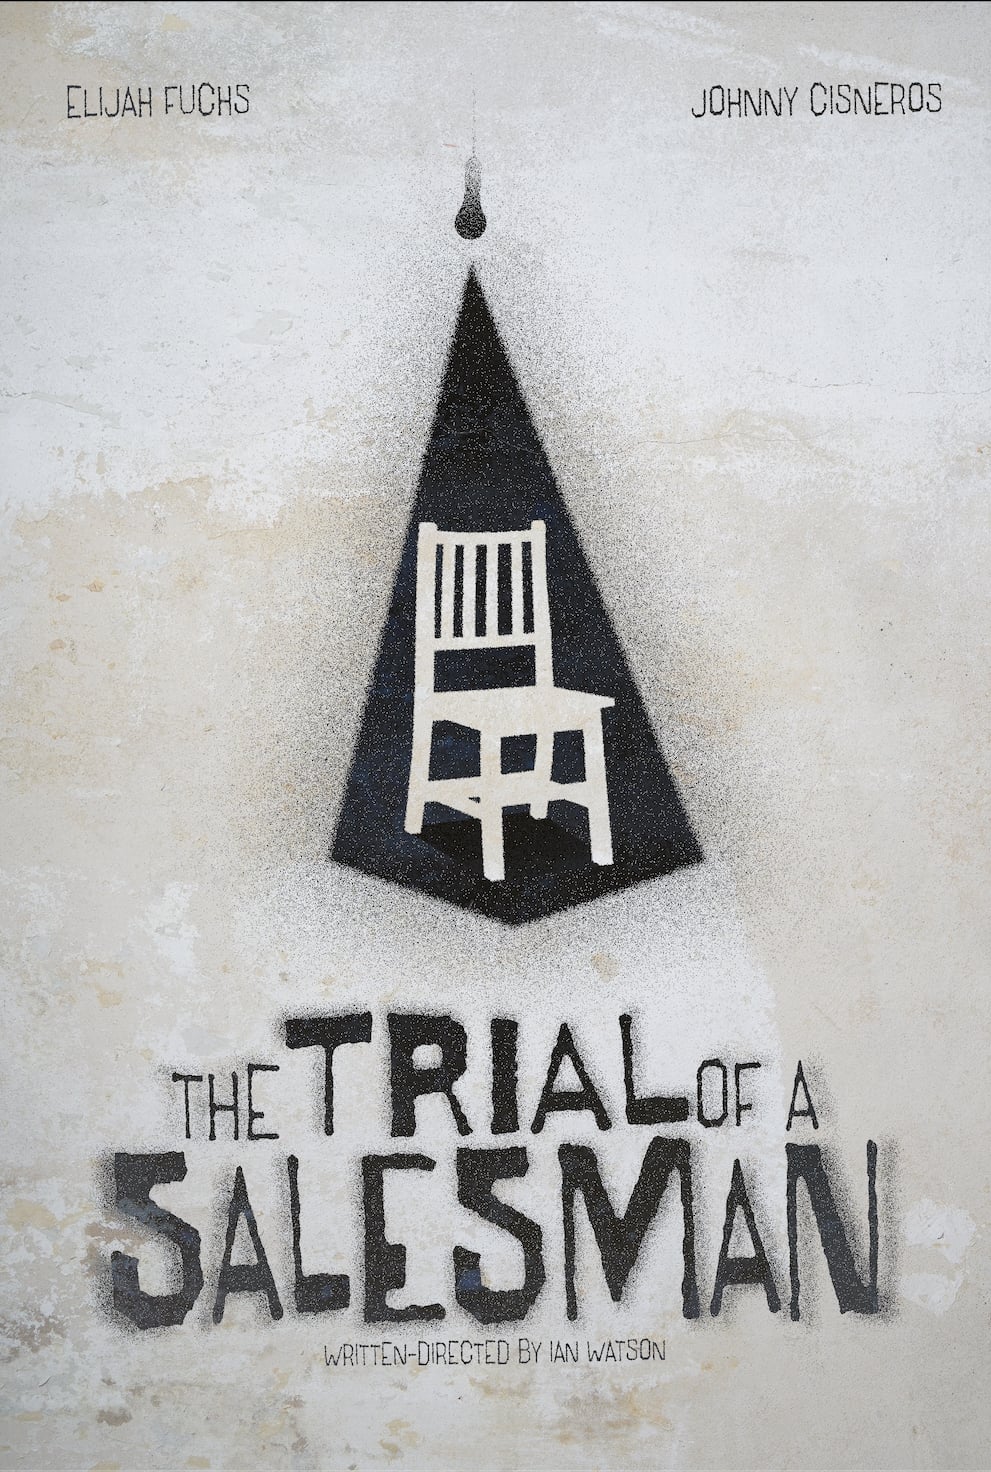 The Trial of a Salesman